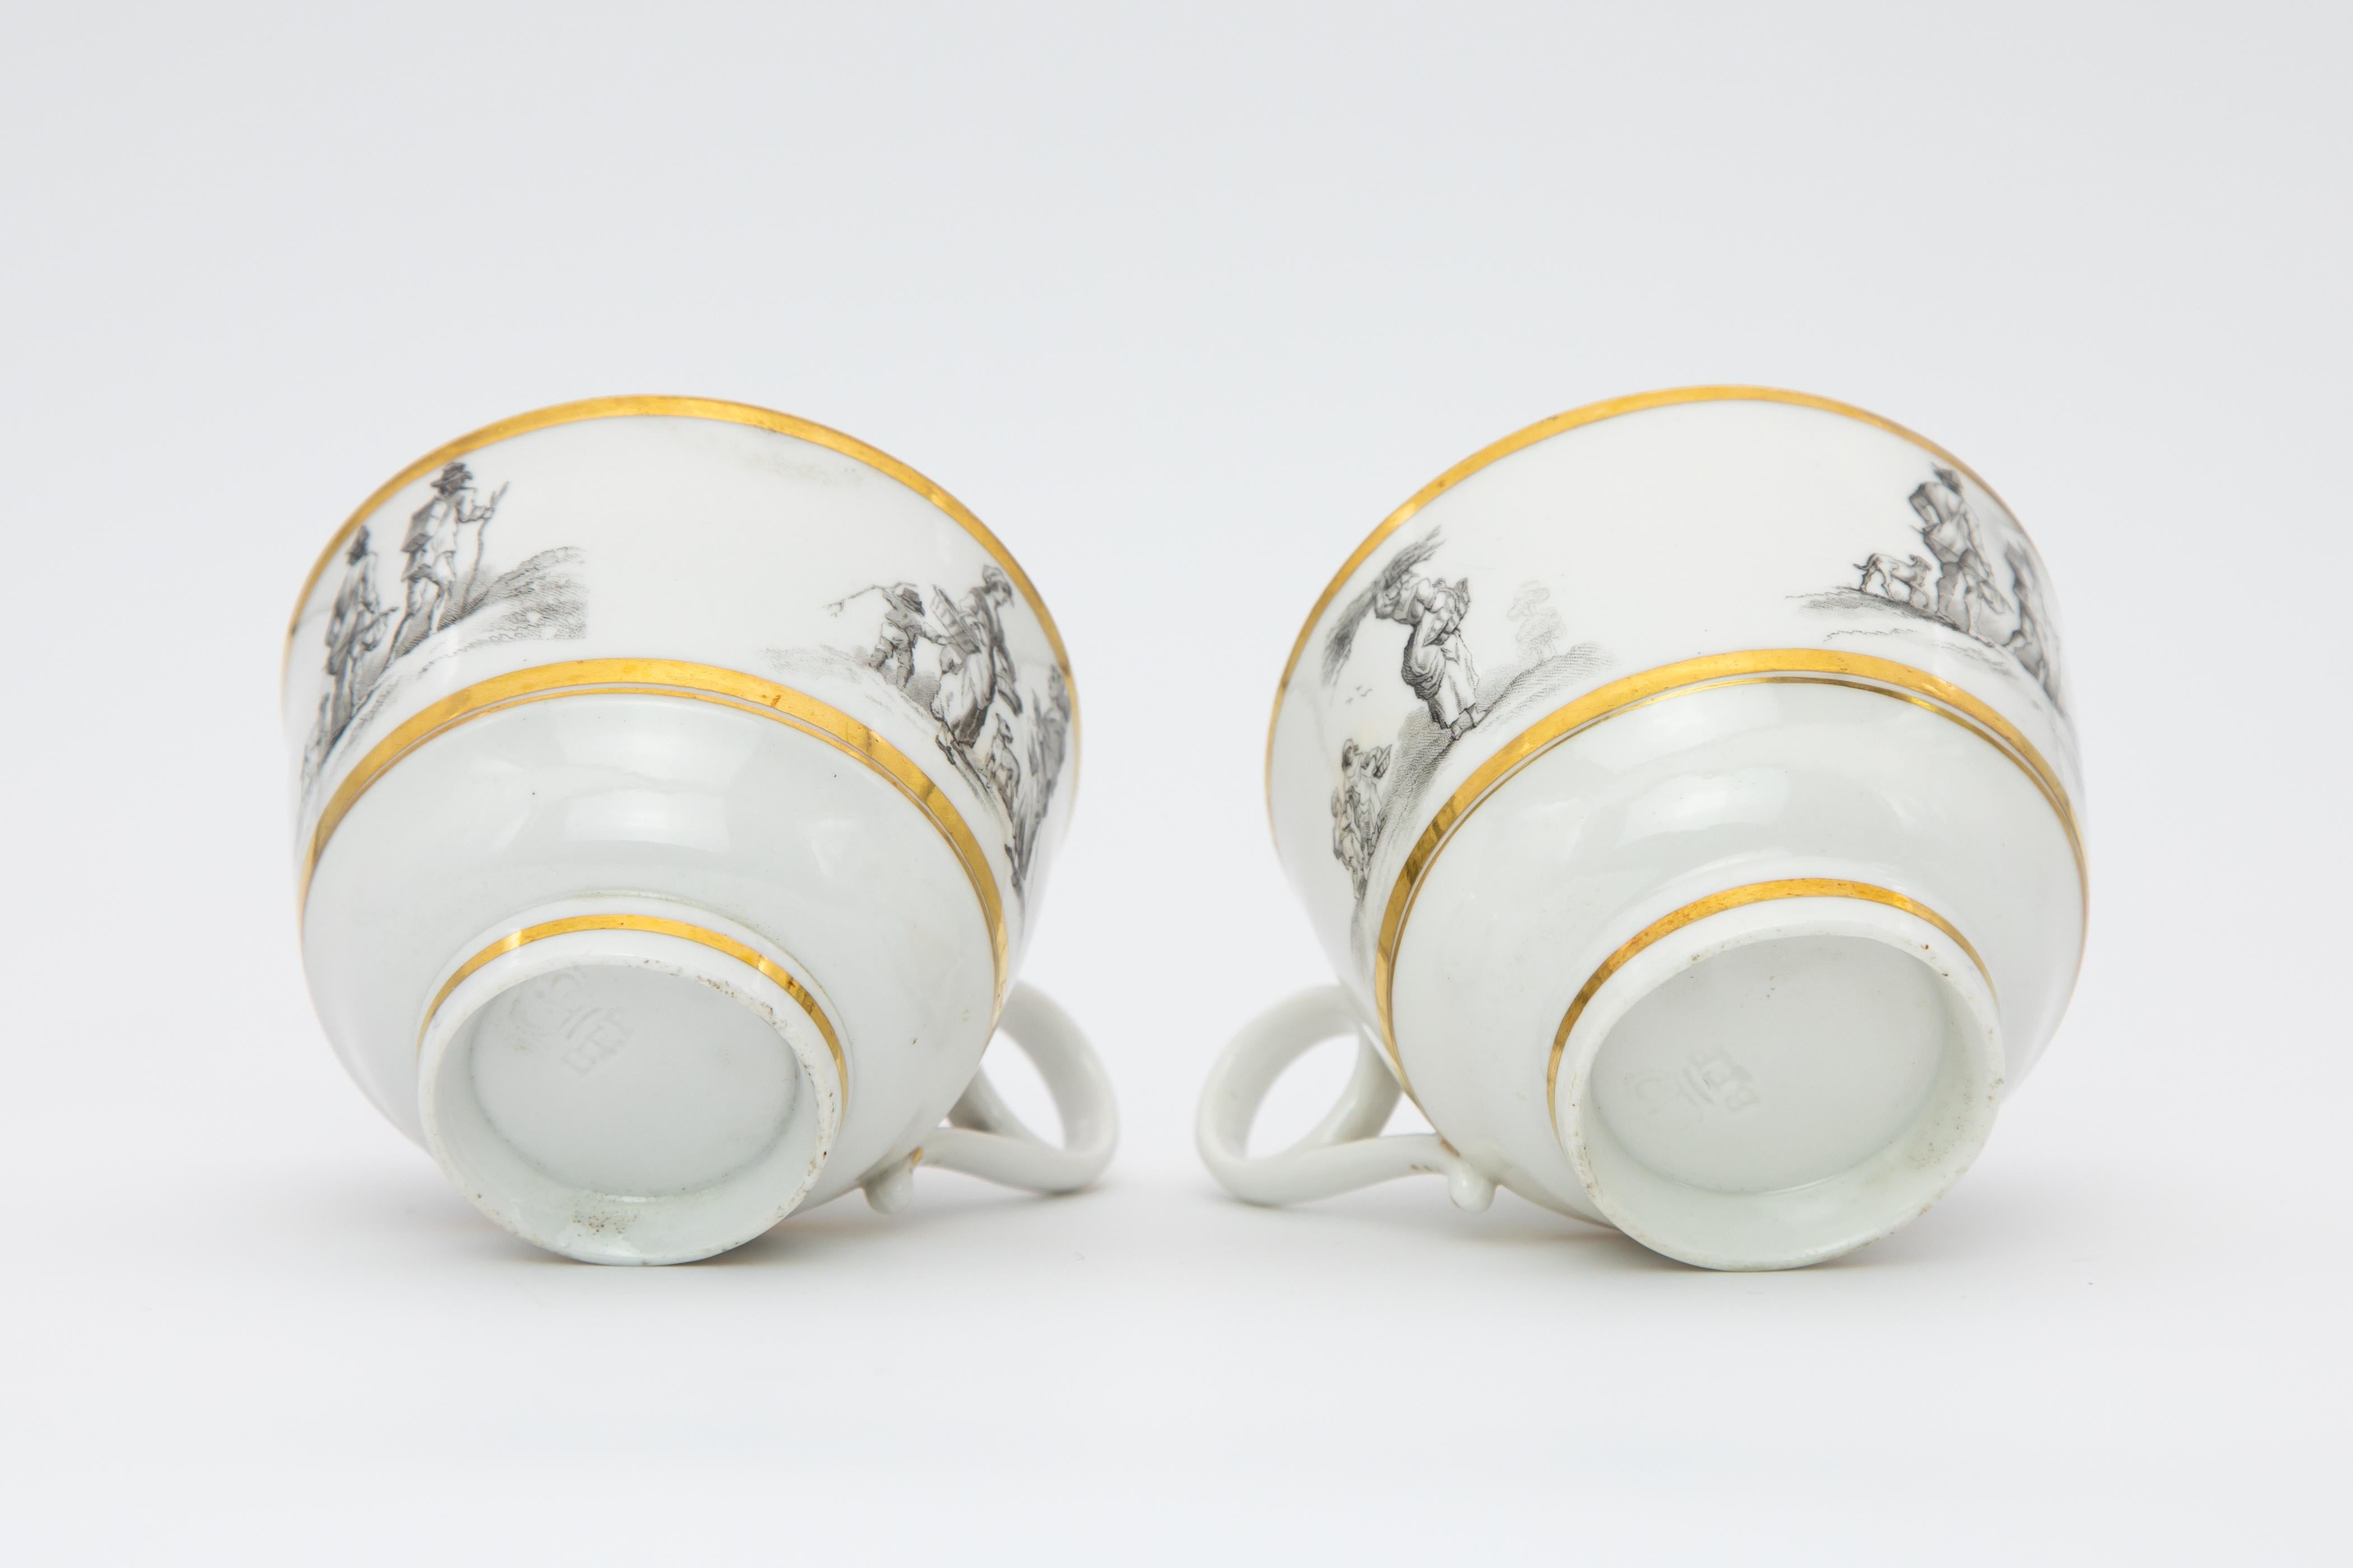 Pair of Early Barr Flight Barr Porcelain Teacups and Saucers For Sale 6